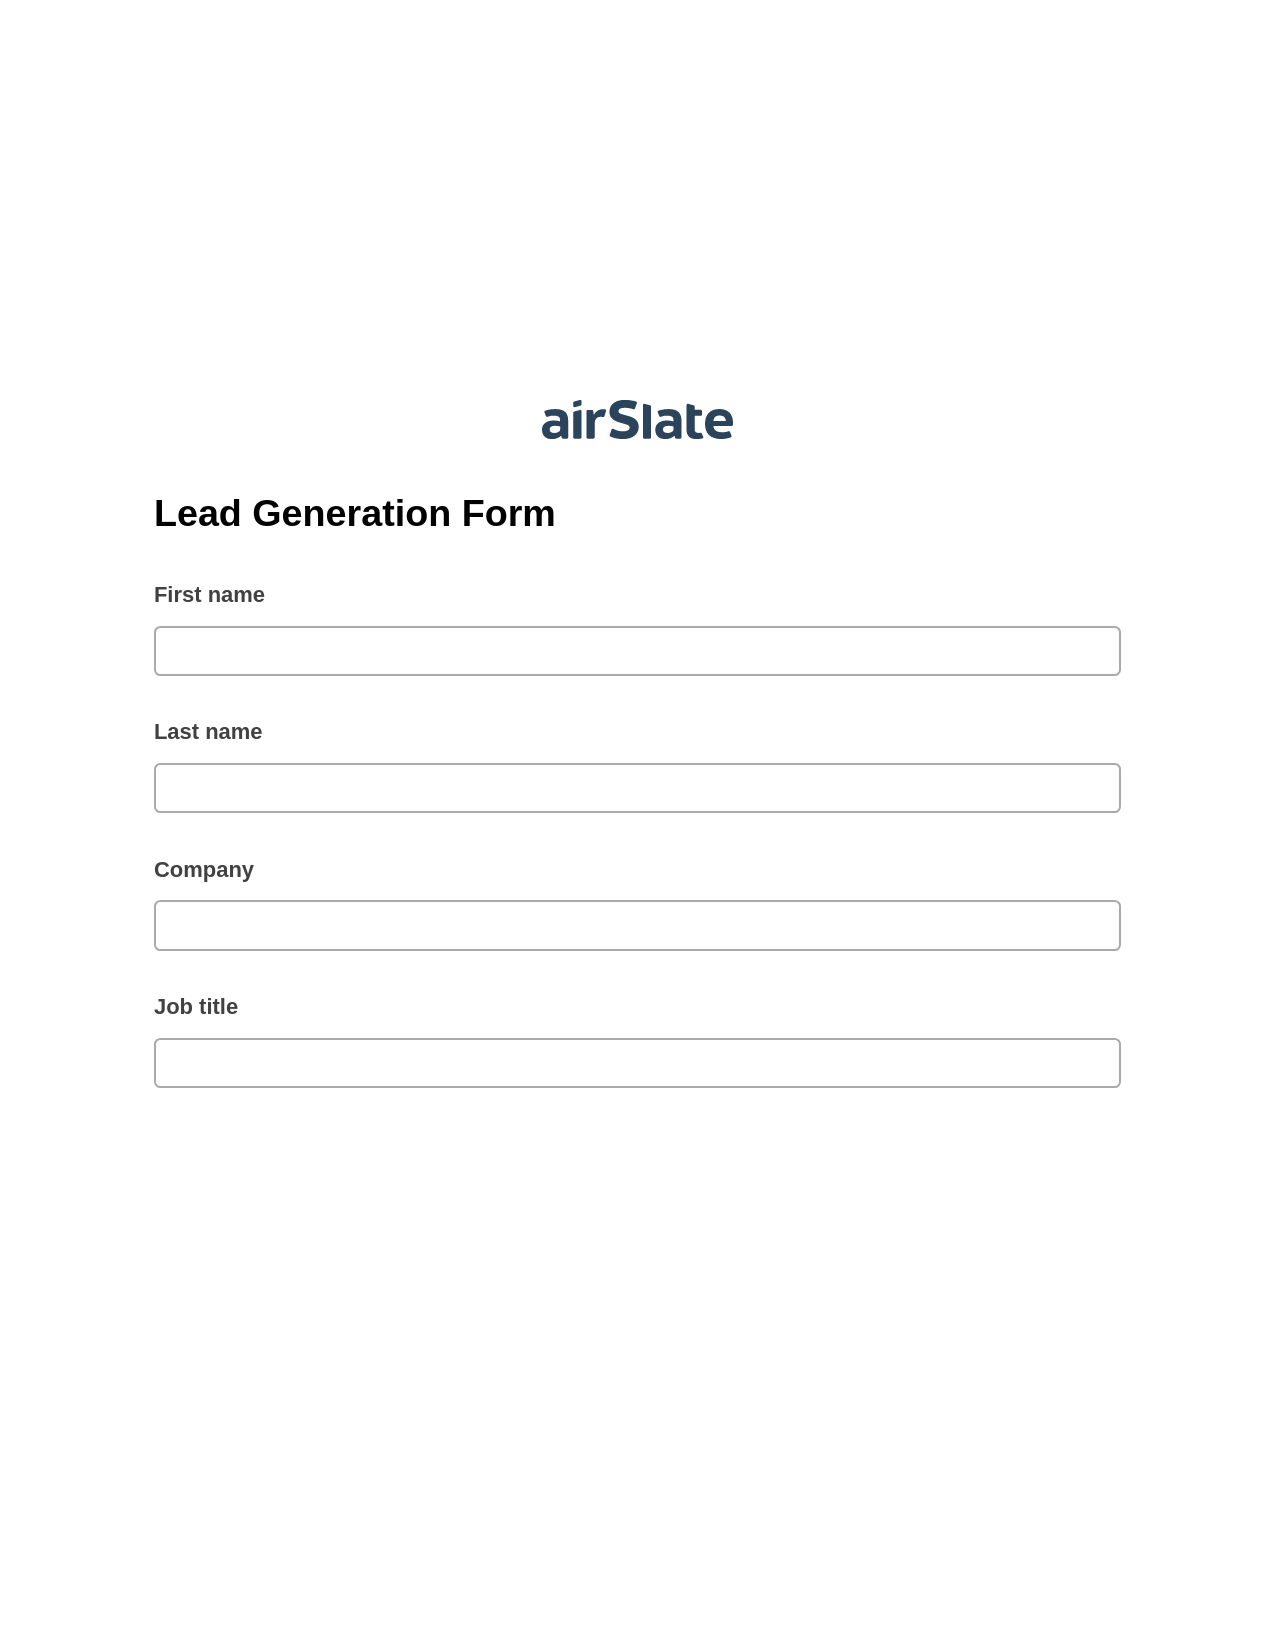 Lead Generation Form Pre-fill Document Bot, Create slate bot, Email Notification Postfinish Bot